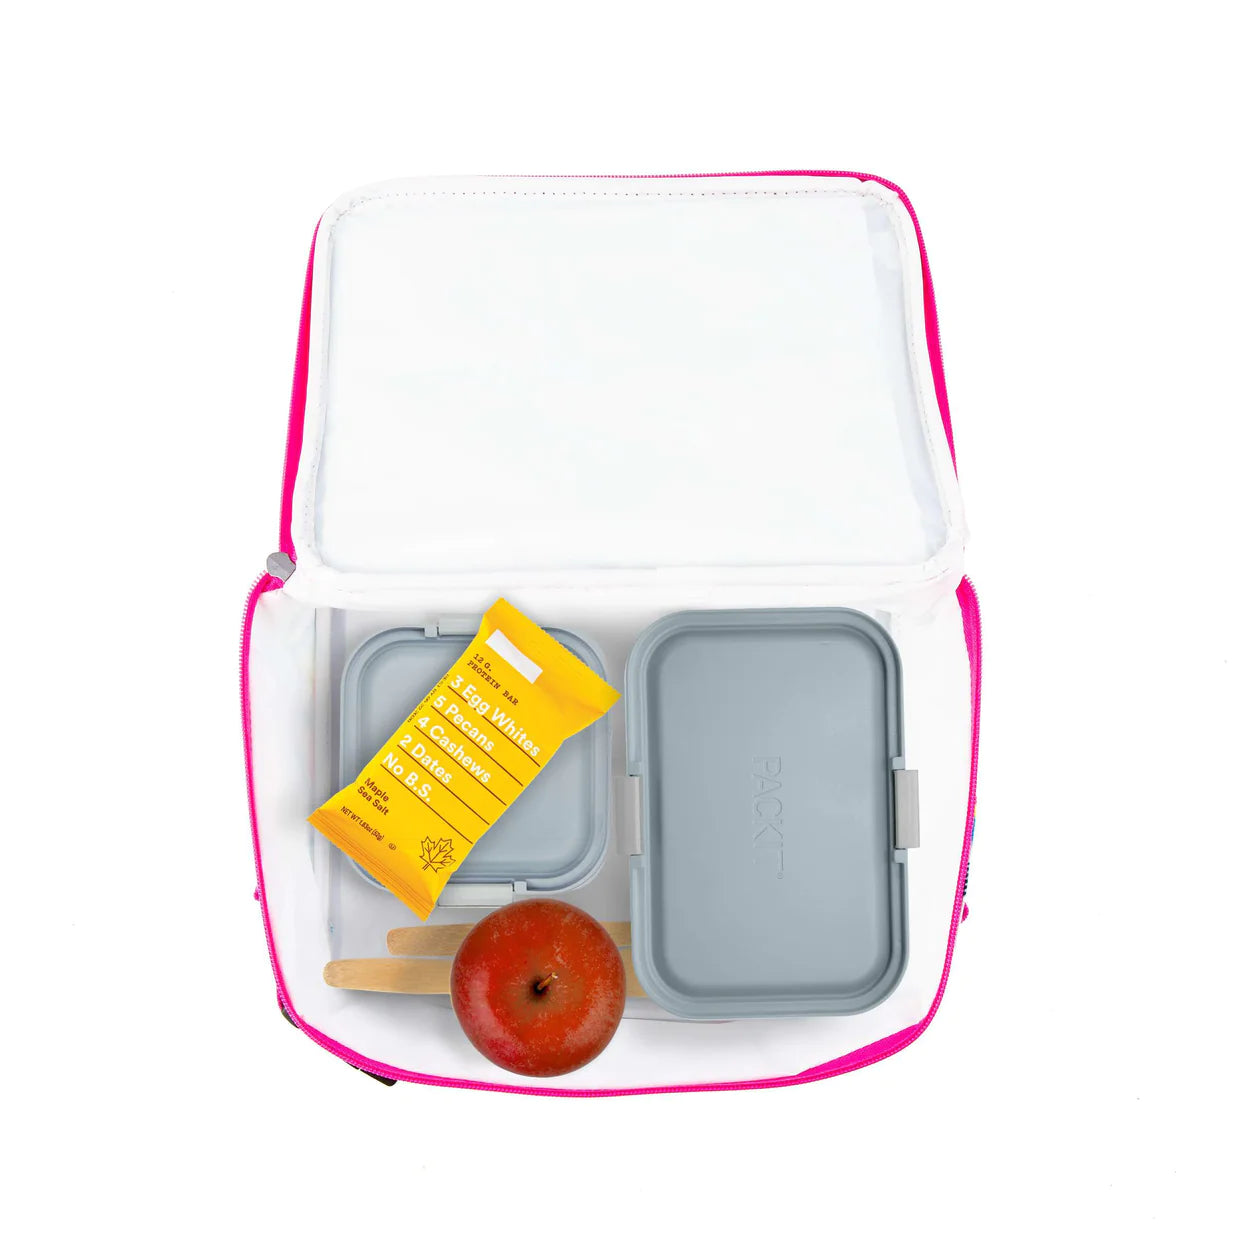 ERGO Packit Soft Sided Lunch Box | Shop at The Green Collective